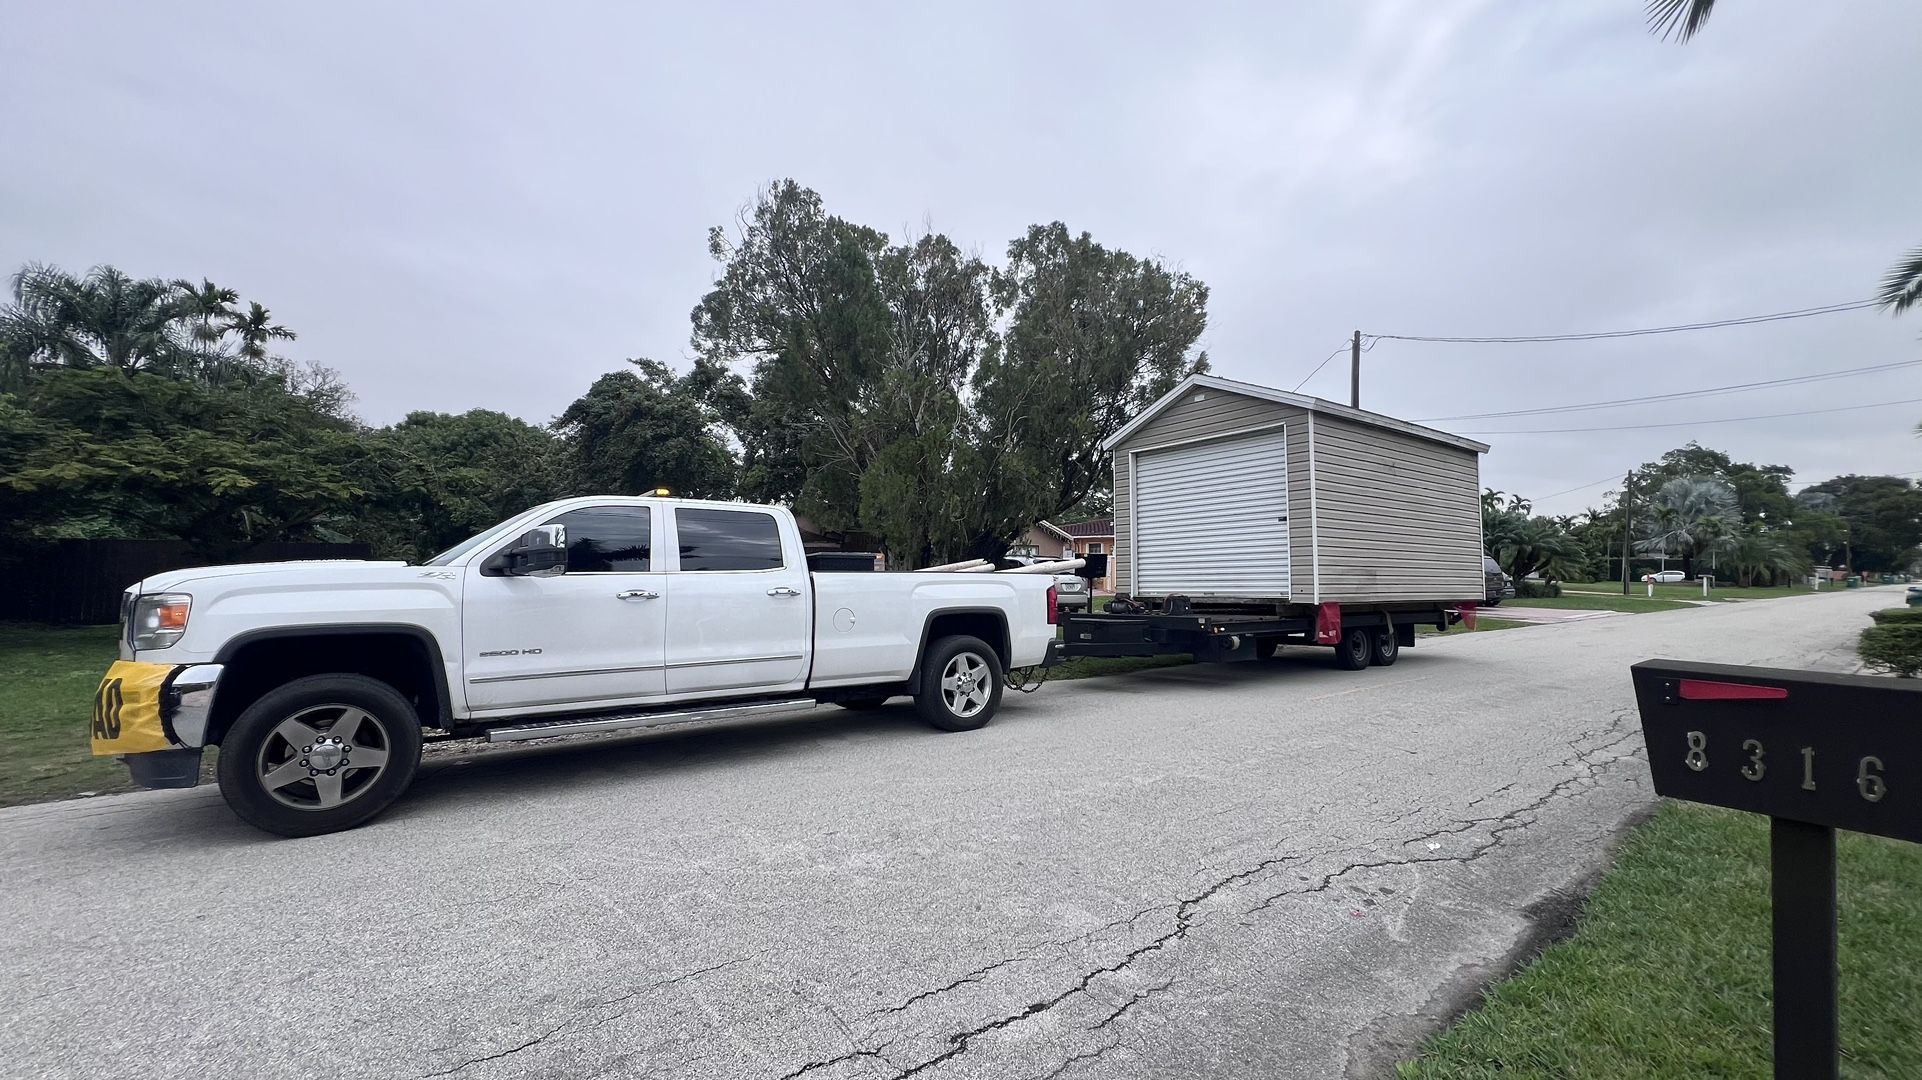 Shed Muving To Relocating All Florida Rv Casitas Container Storage 